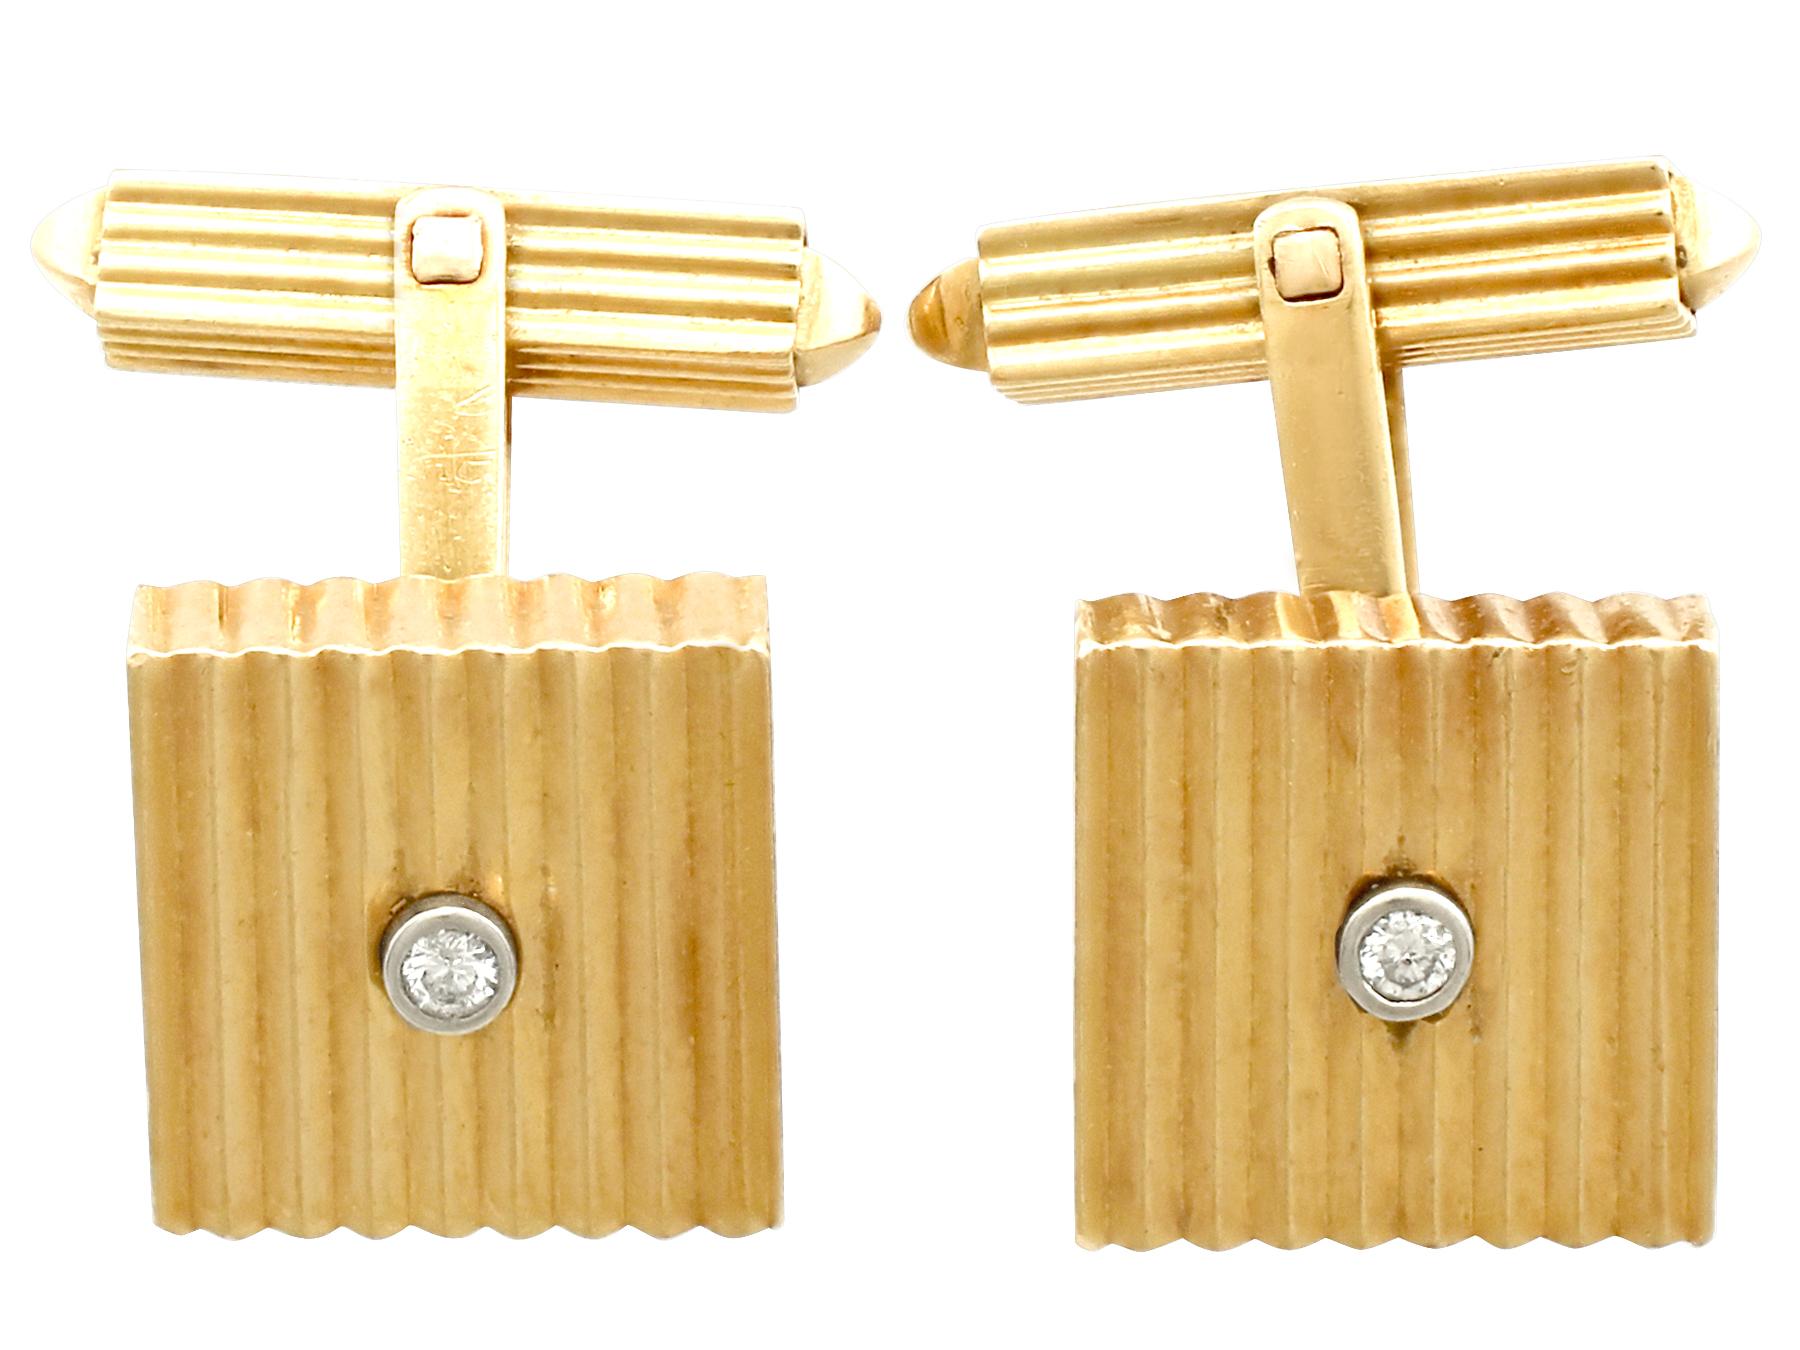 A fine and impressive pair of vintage German 0.06 carat diamond and 18 karat yellow gold cufflinks in the Art Deco style; an addition our vintage jewelry/estate jewelry collections.

These impressive vintage cufflinks have been crafted in 18k yellow